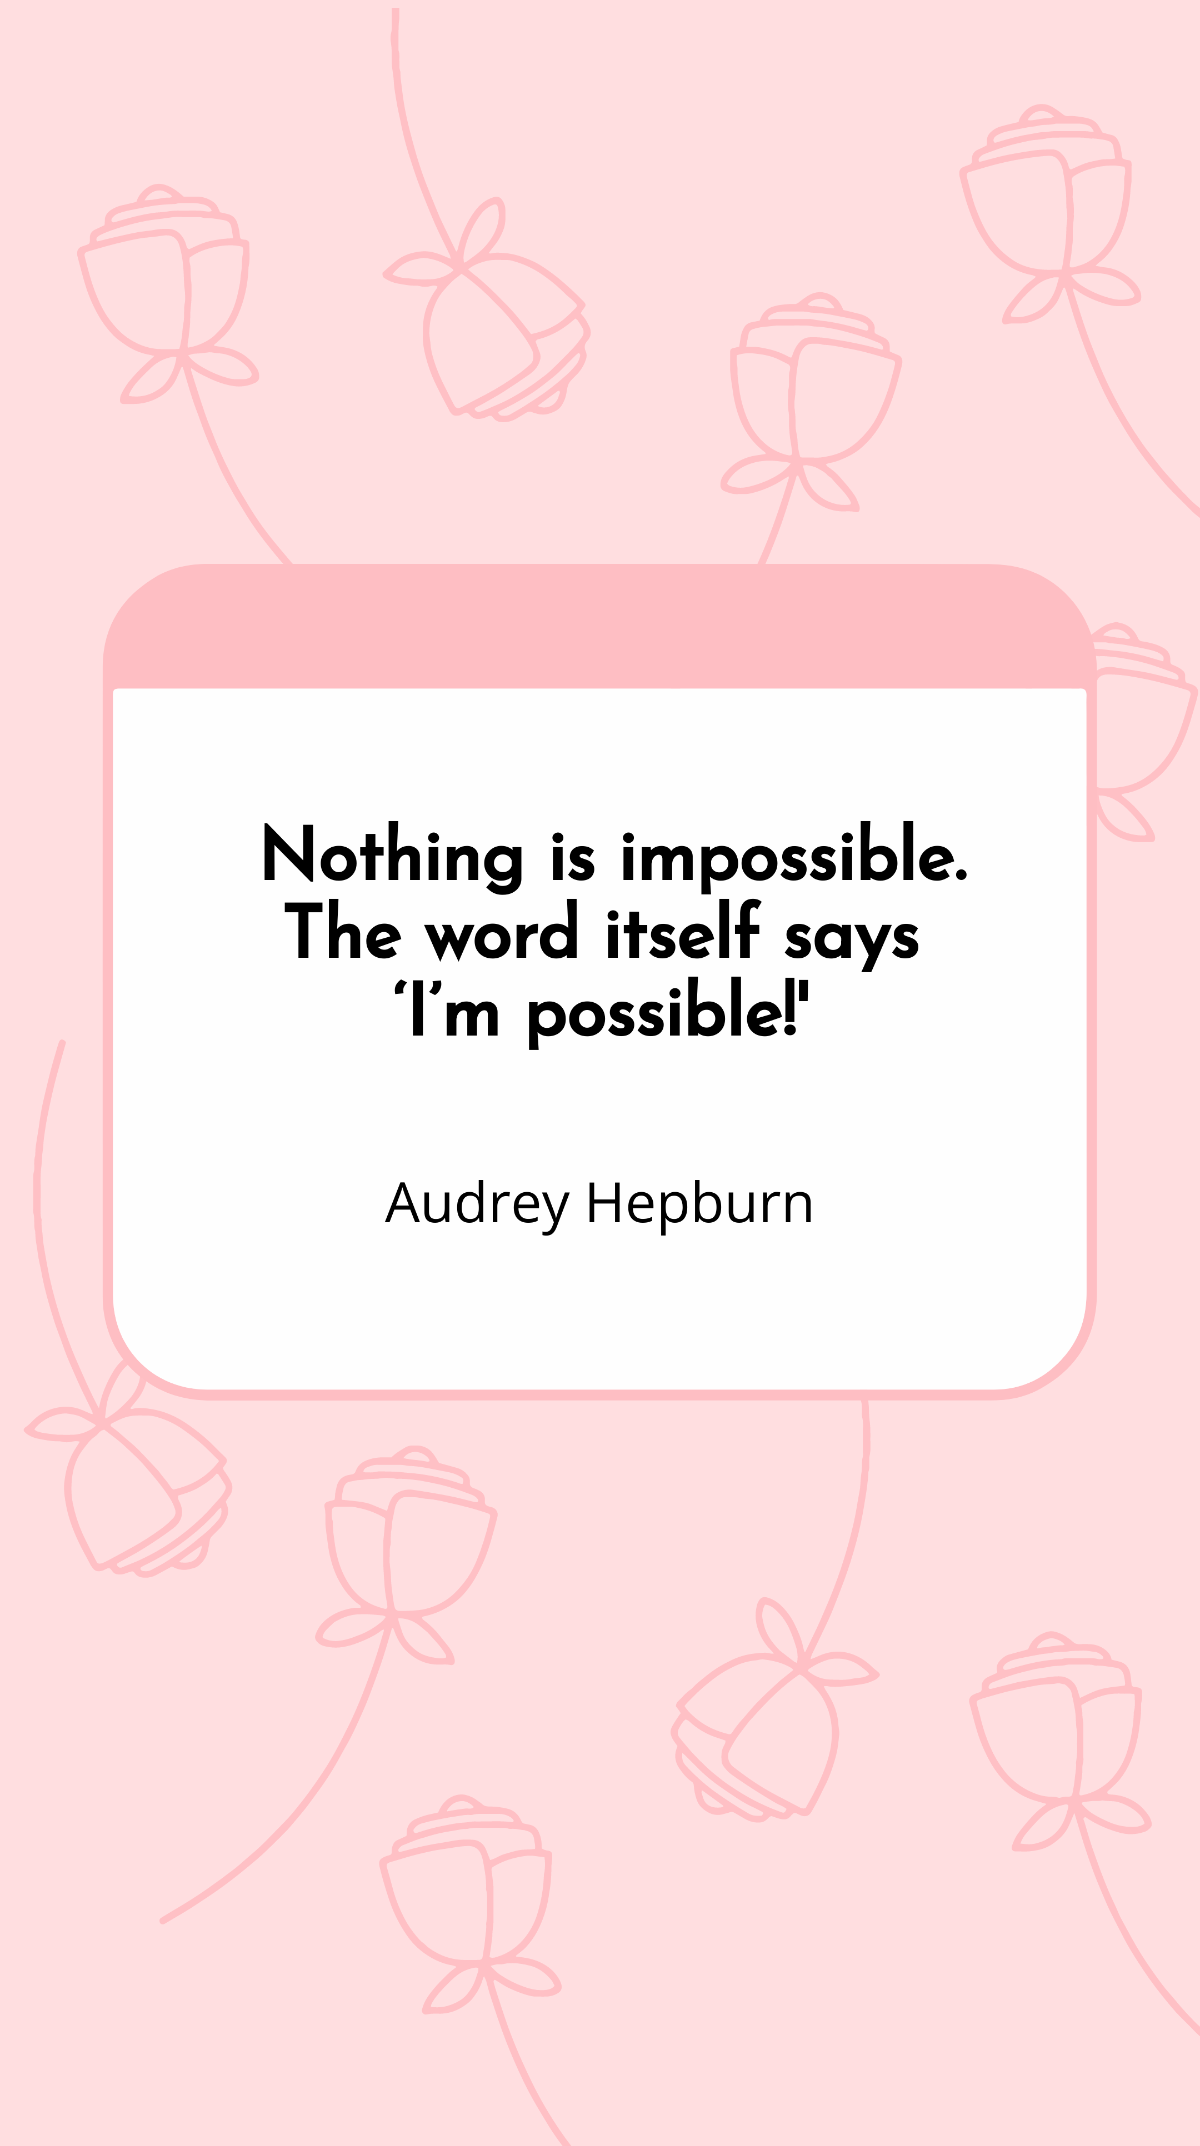 Audrey Hepburn - Nothing is impossible. The word itself says ‘I’m possible!'